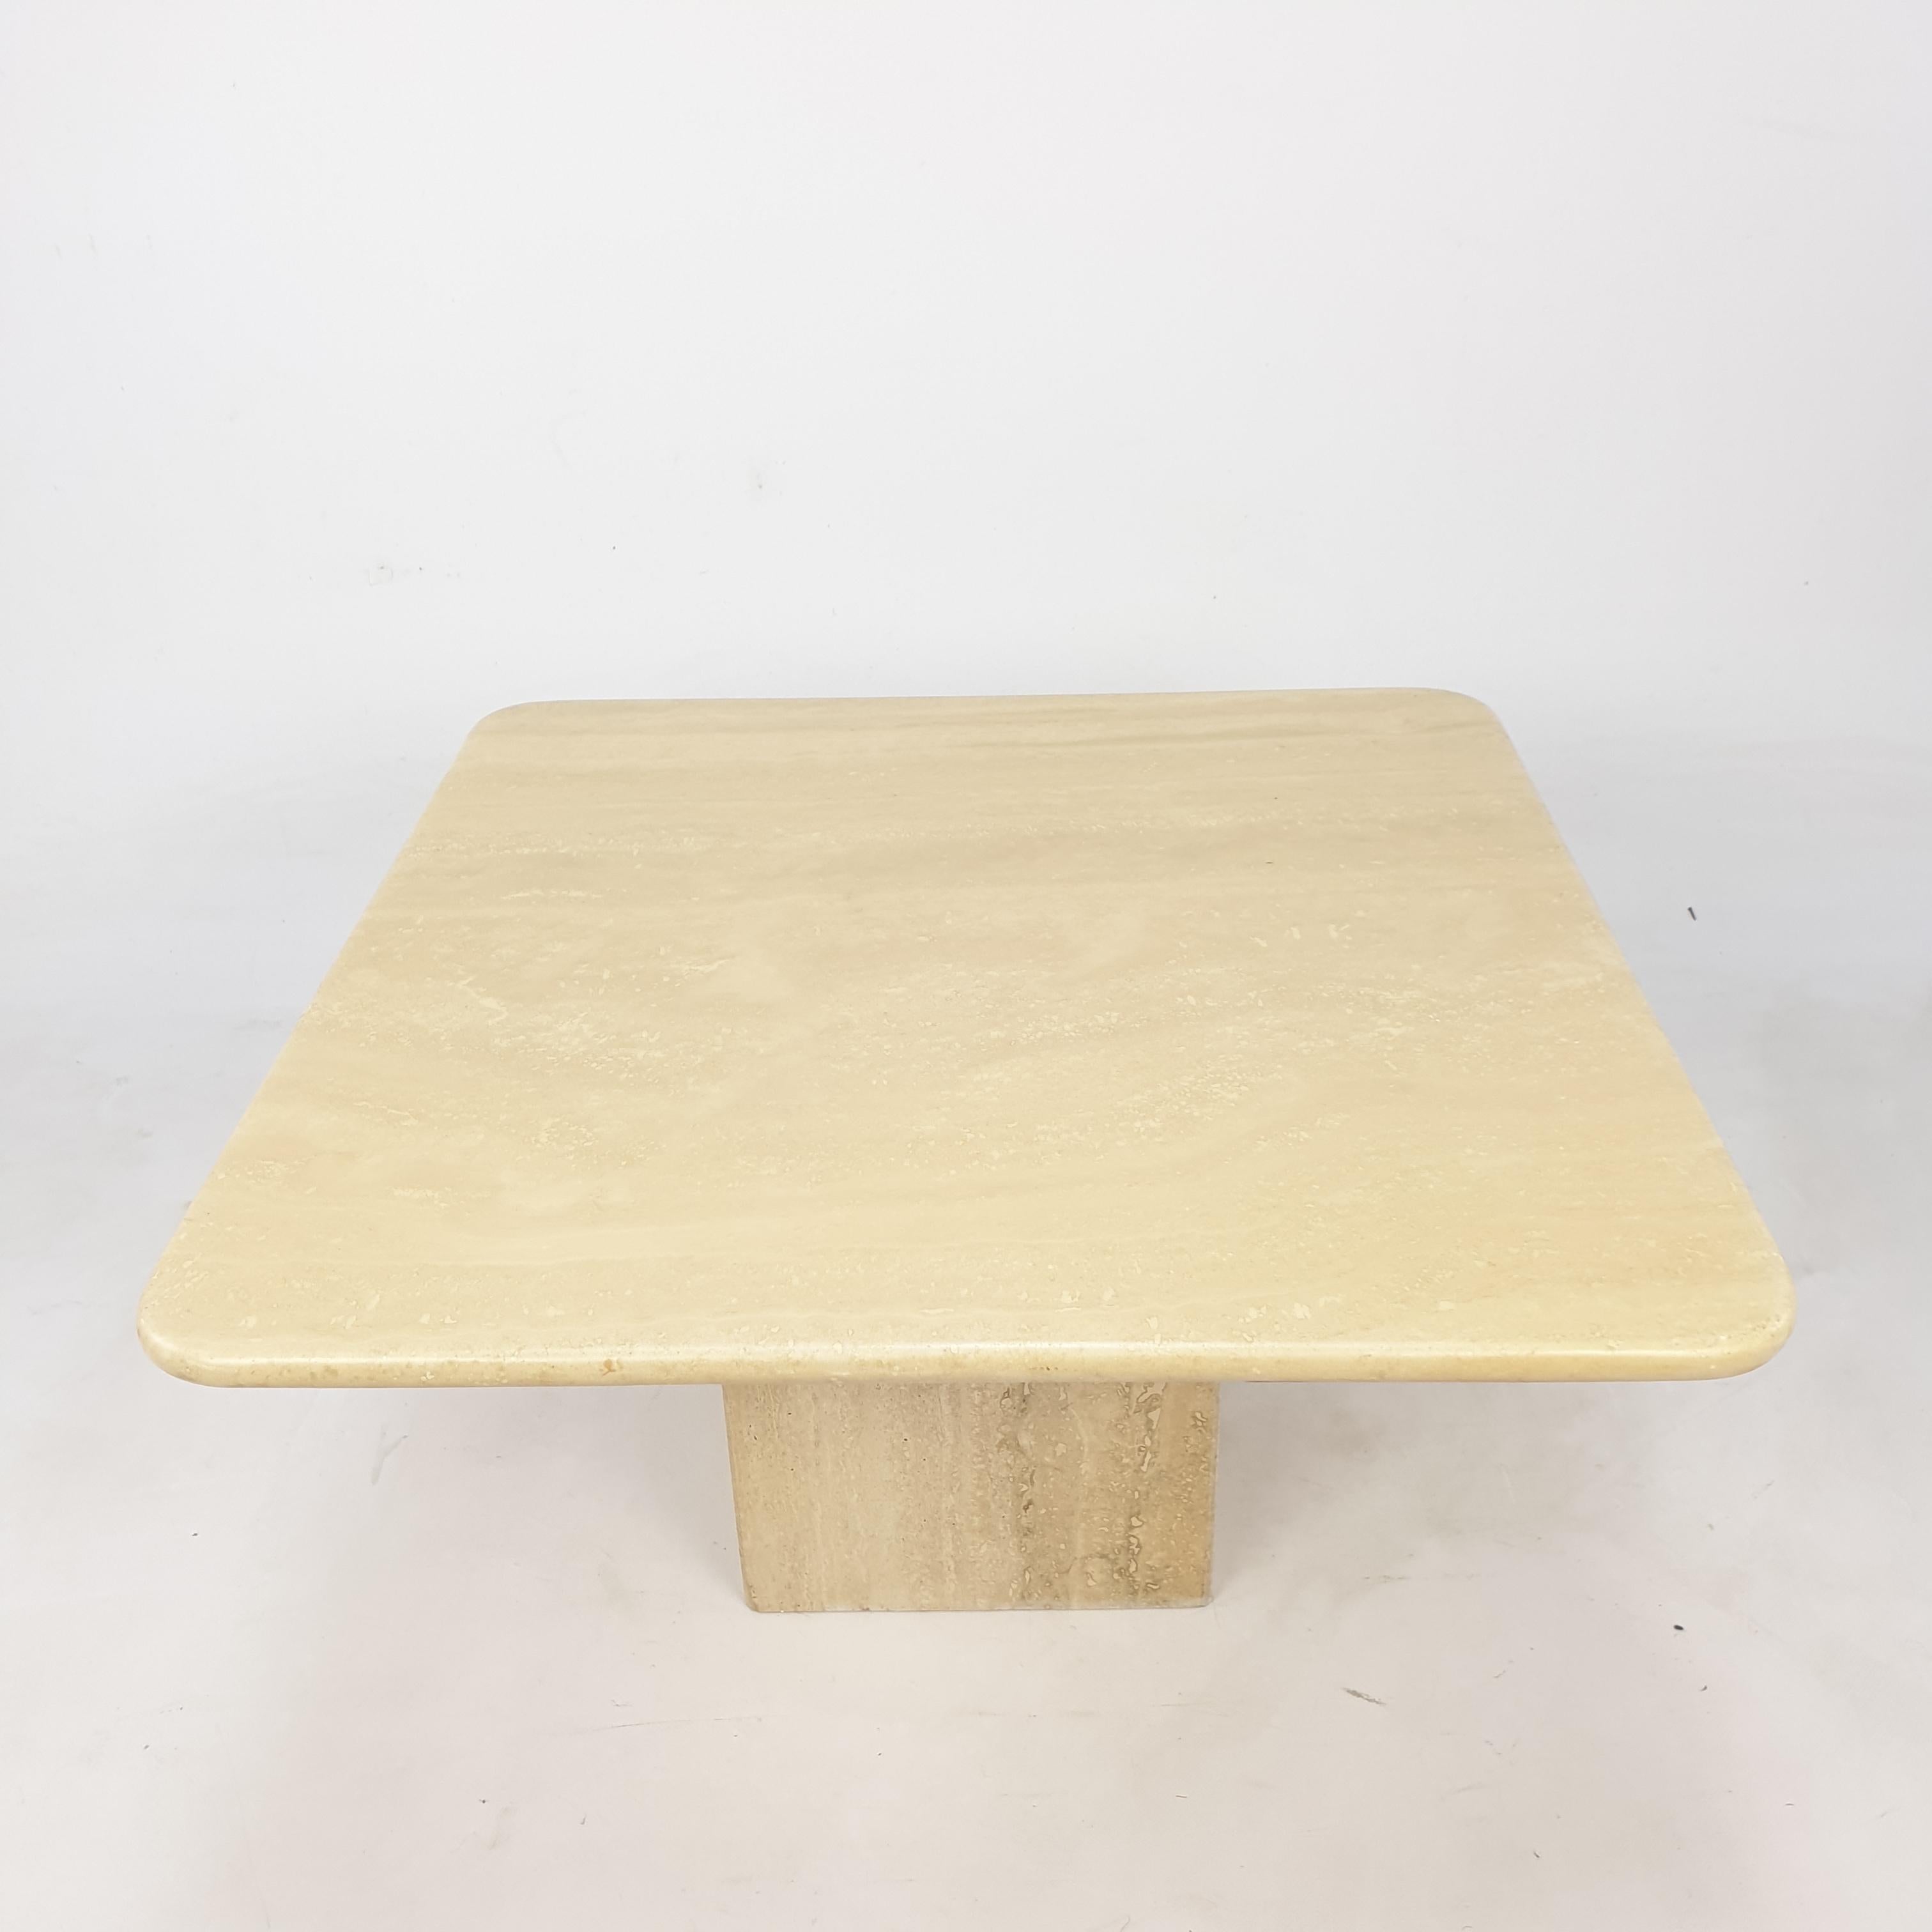 Very nice Italian coffee table from the 80's, handcrafted out of travertine. The top is rounded on the edge. This stunning table will make the perfect addition to any seating or living room decor for years to come.